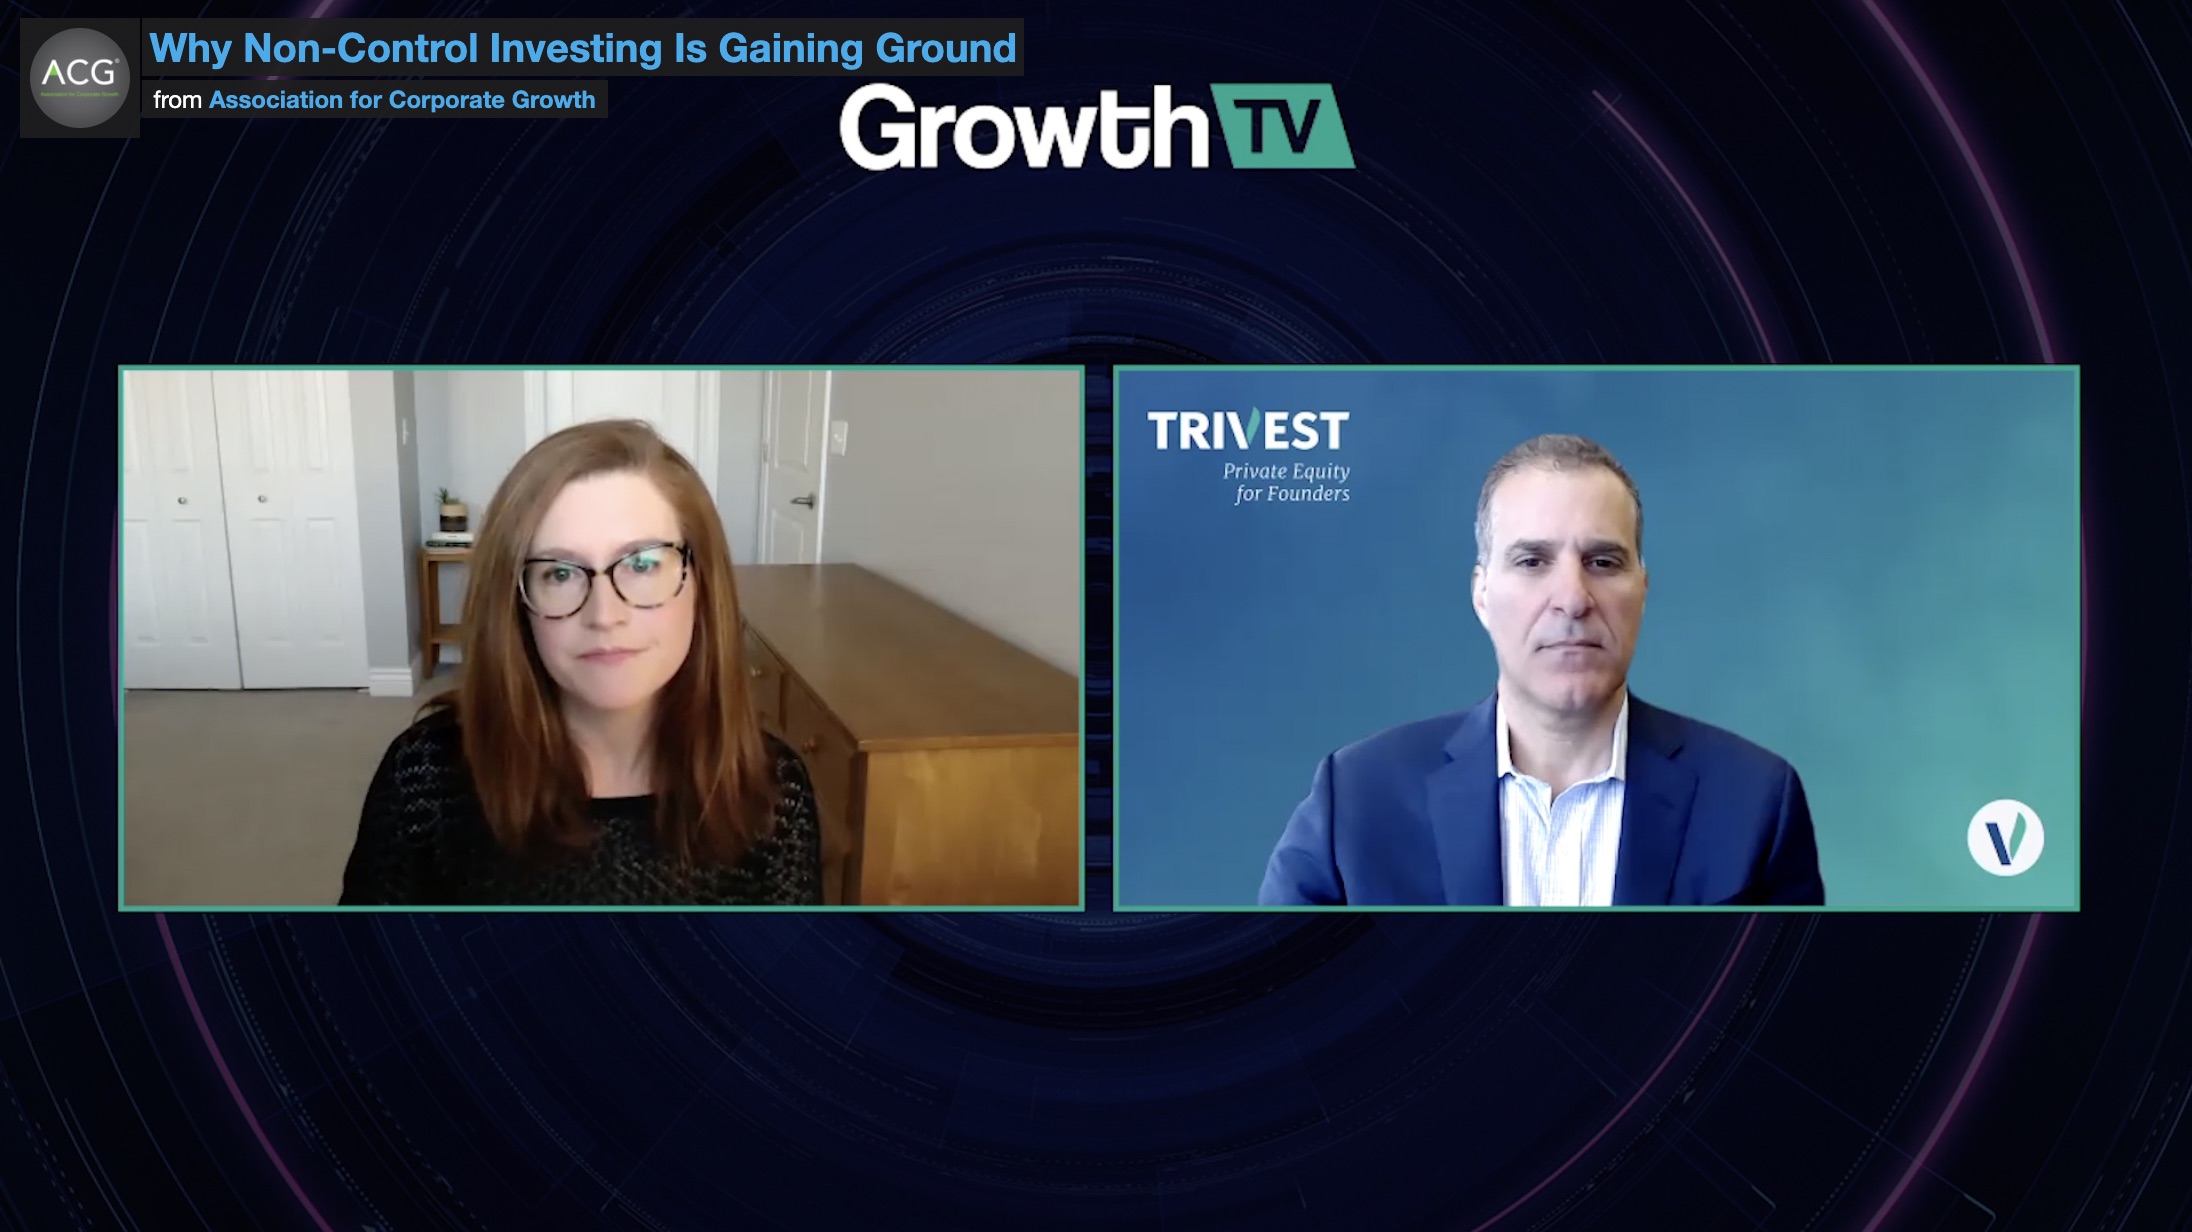 growthtv-trivest-non-control-investing